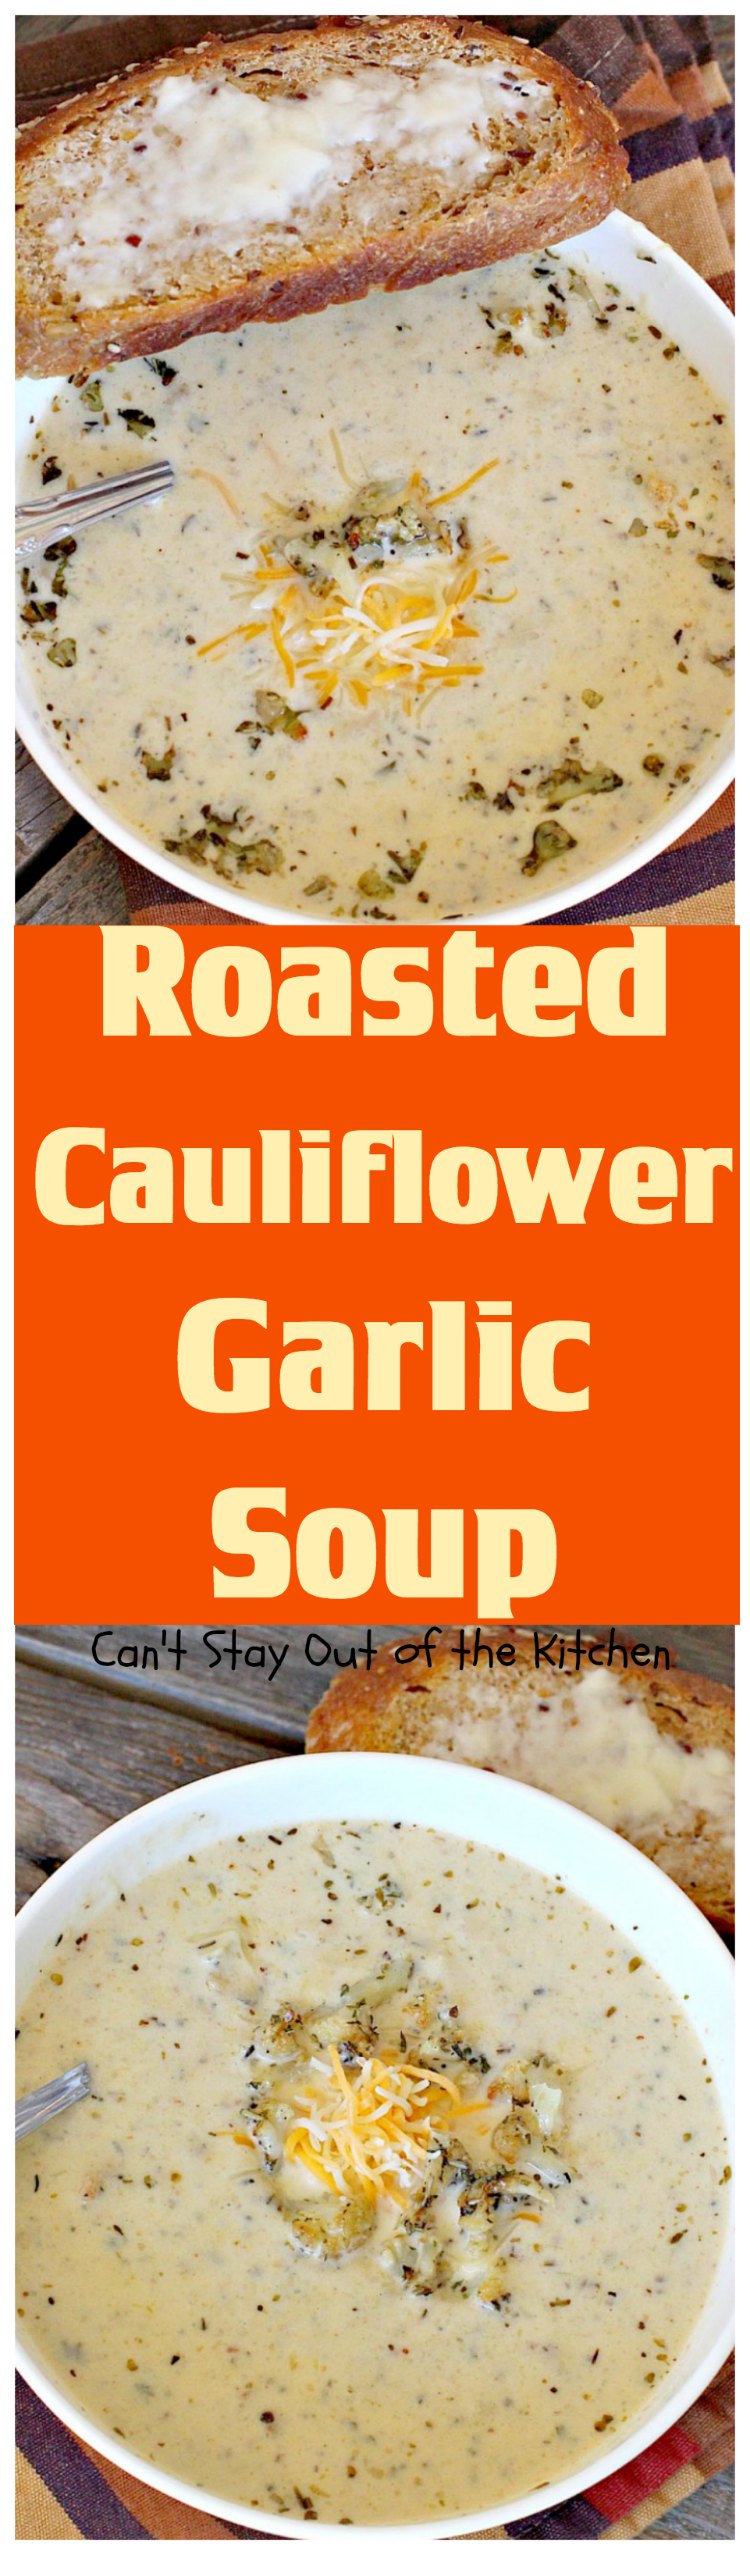 Roasted Cauliflower Garlic Soup | Can't Stay Out of the Kitchen